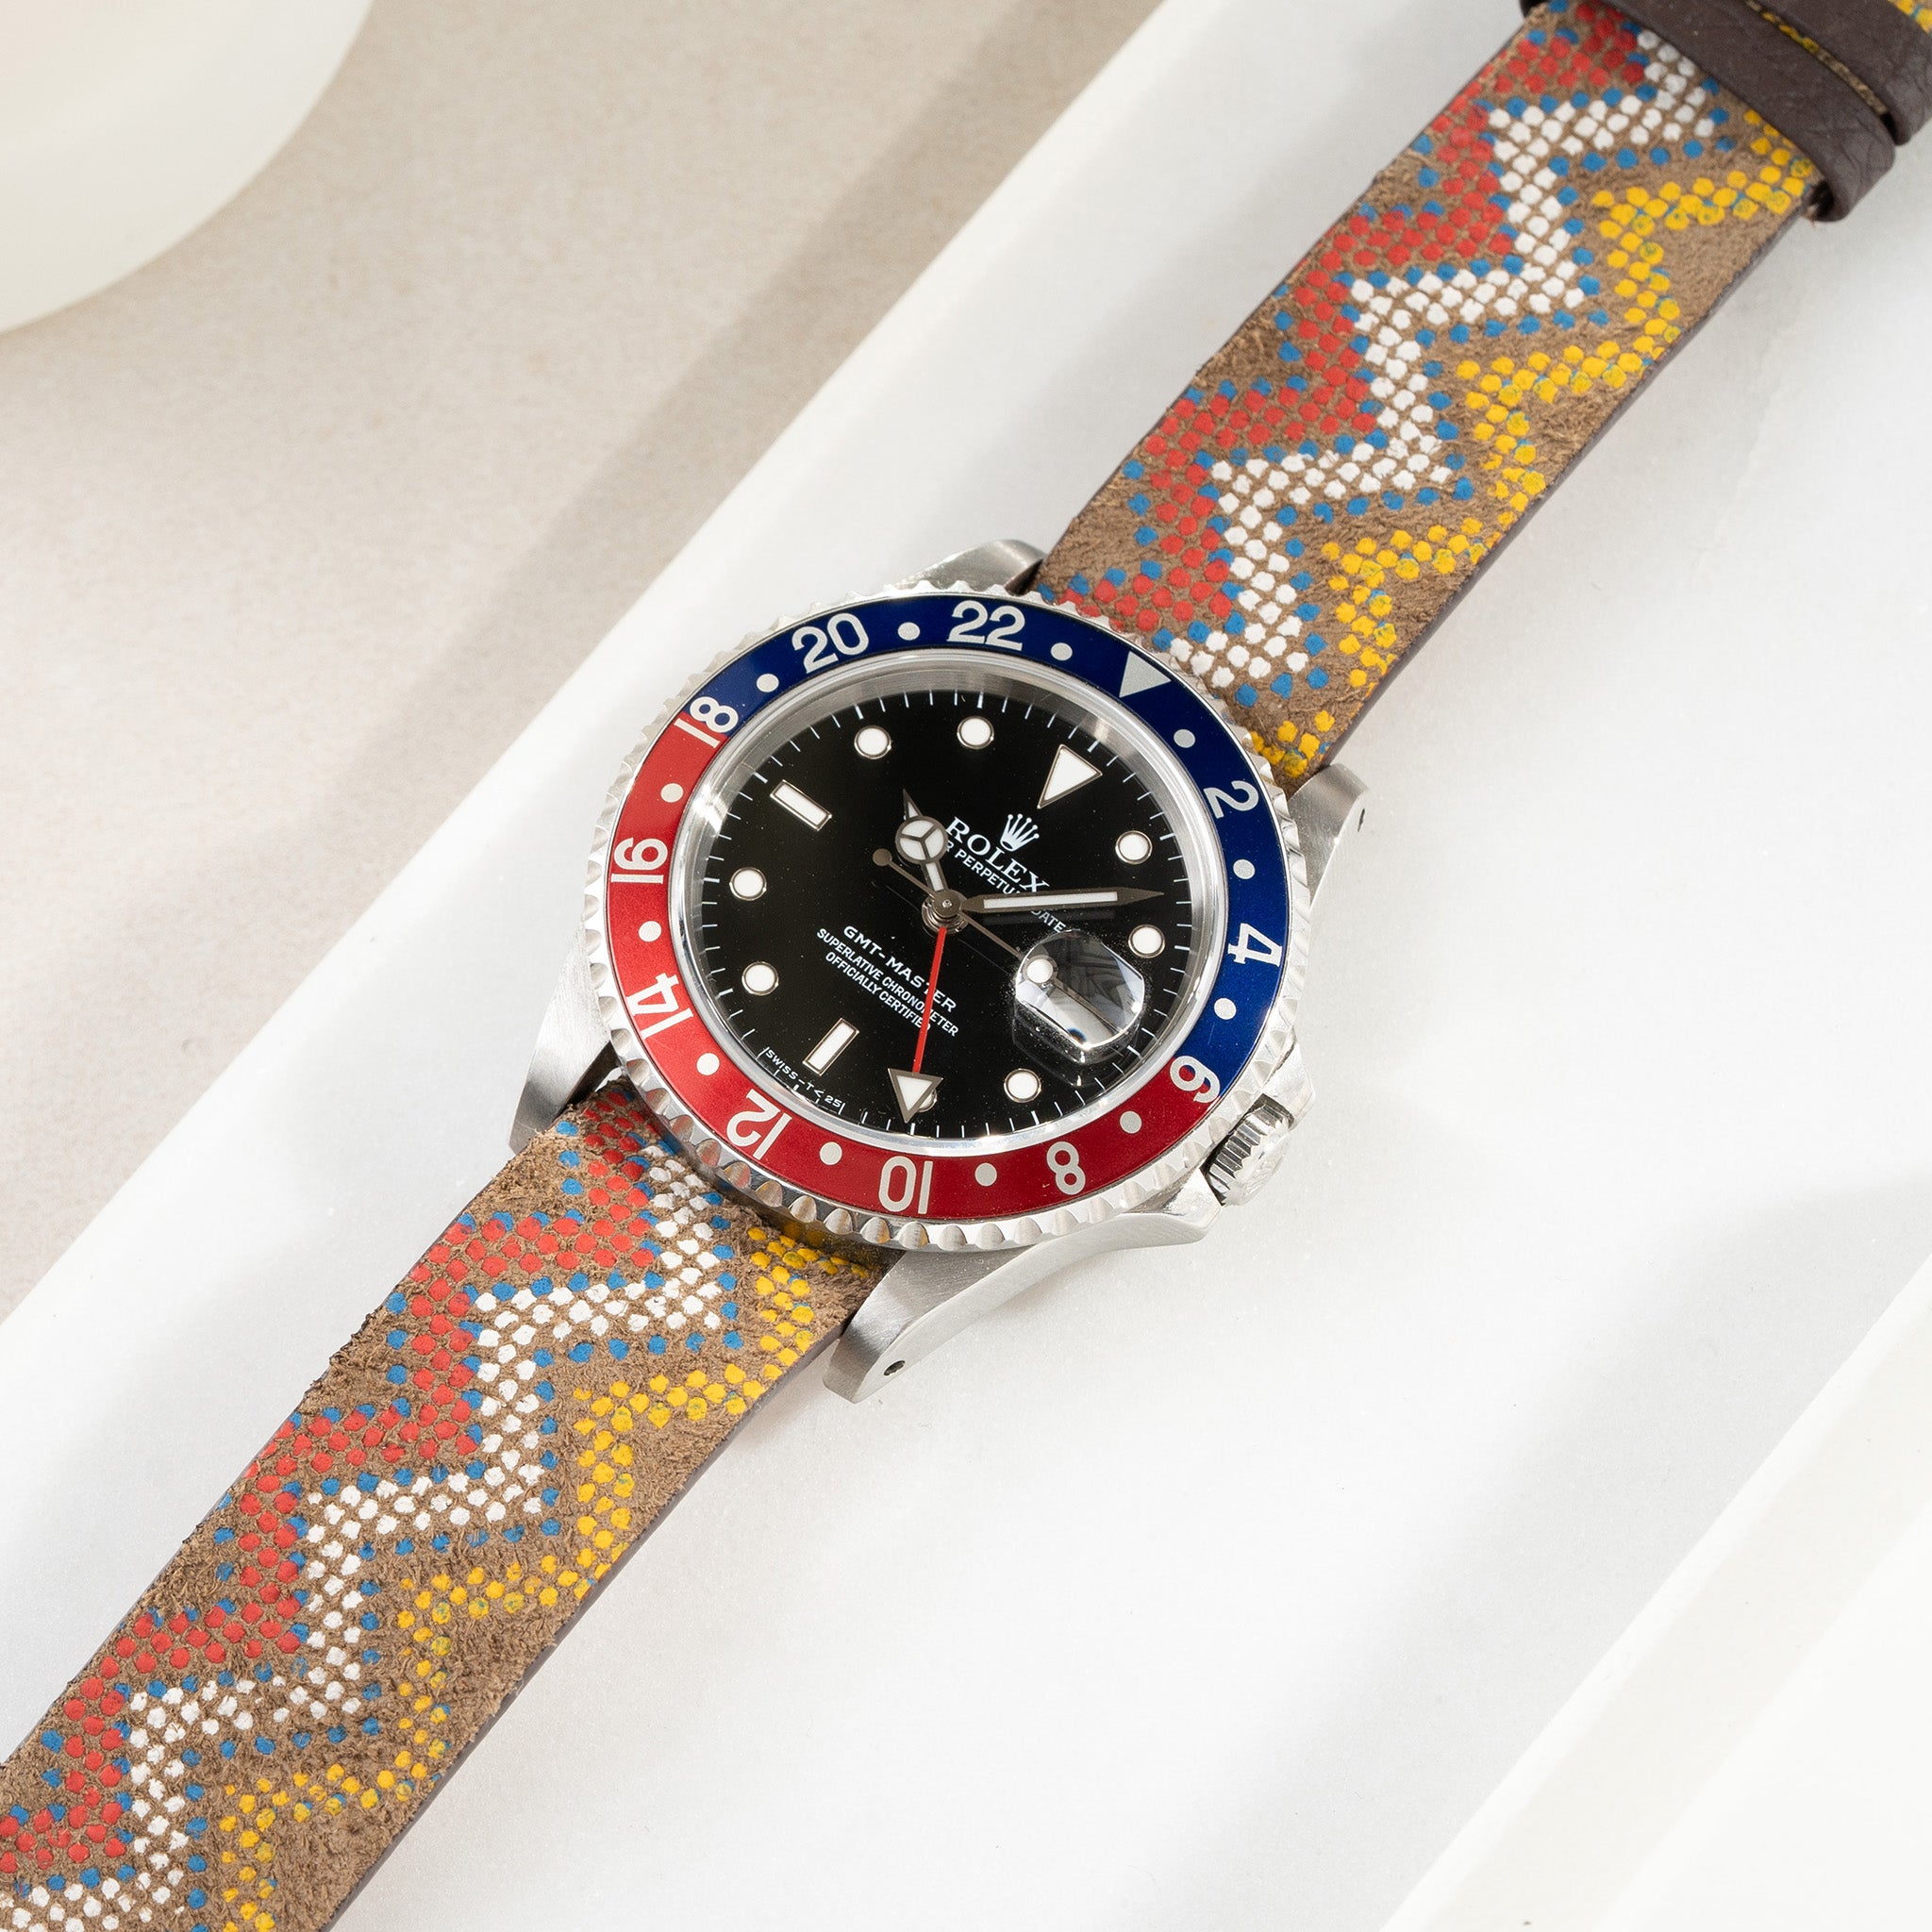 native_style_single_pass_brown_leather_watch_strap_Rolex_gmt_Master_16700